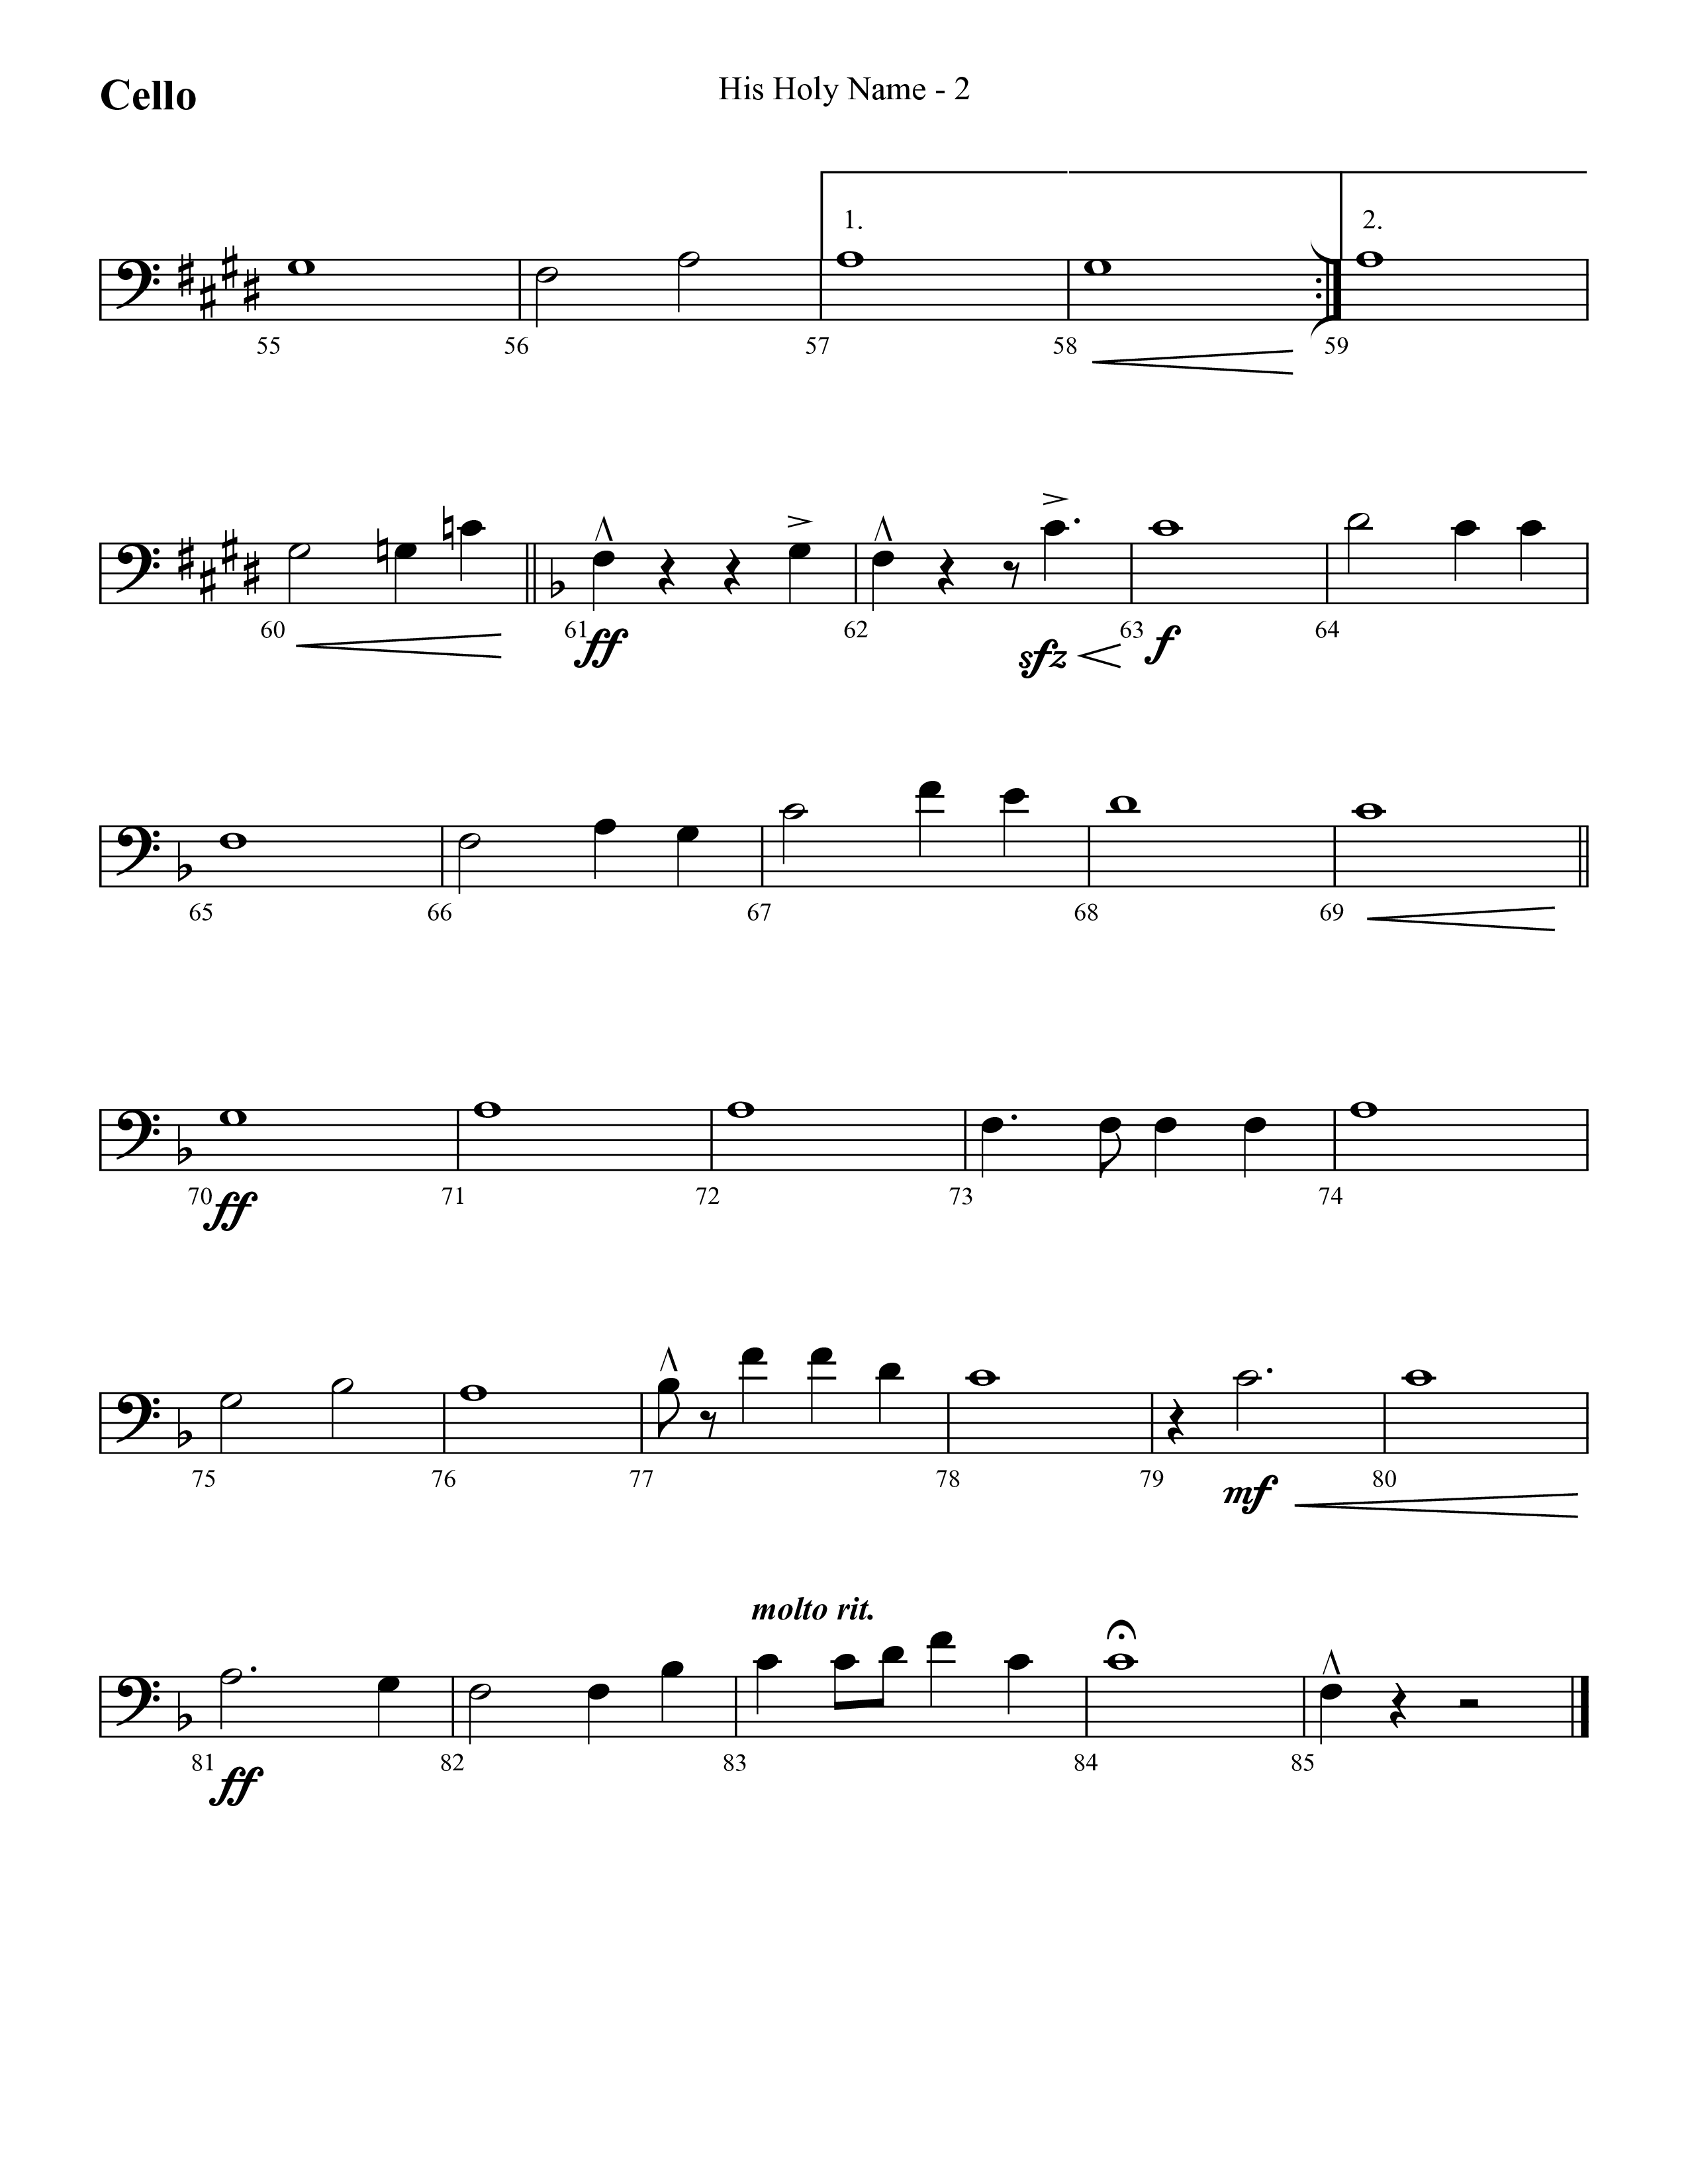 His Holy Name (with Blessed Be The Name) (Choral Anthem SATB) Cello (Lifeway Choral / Arr. Cliff Duren)